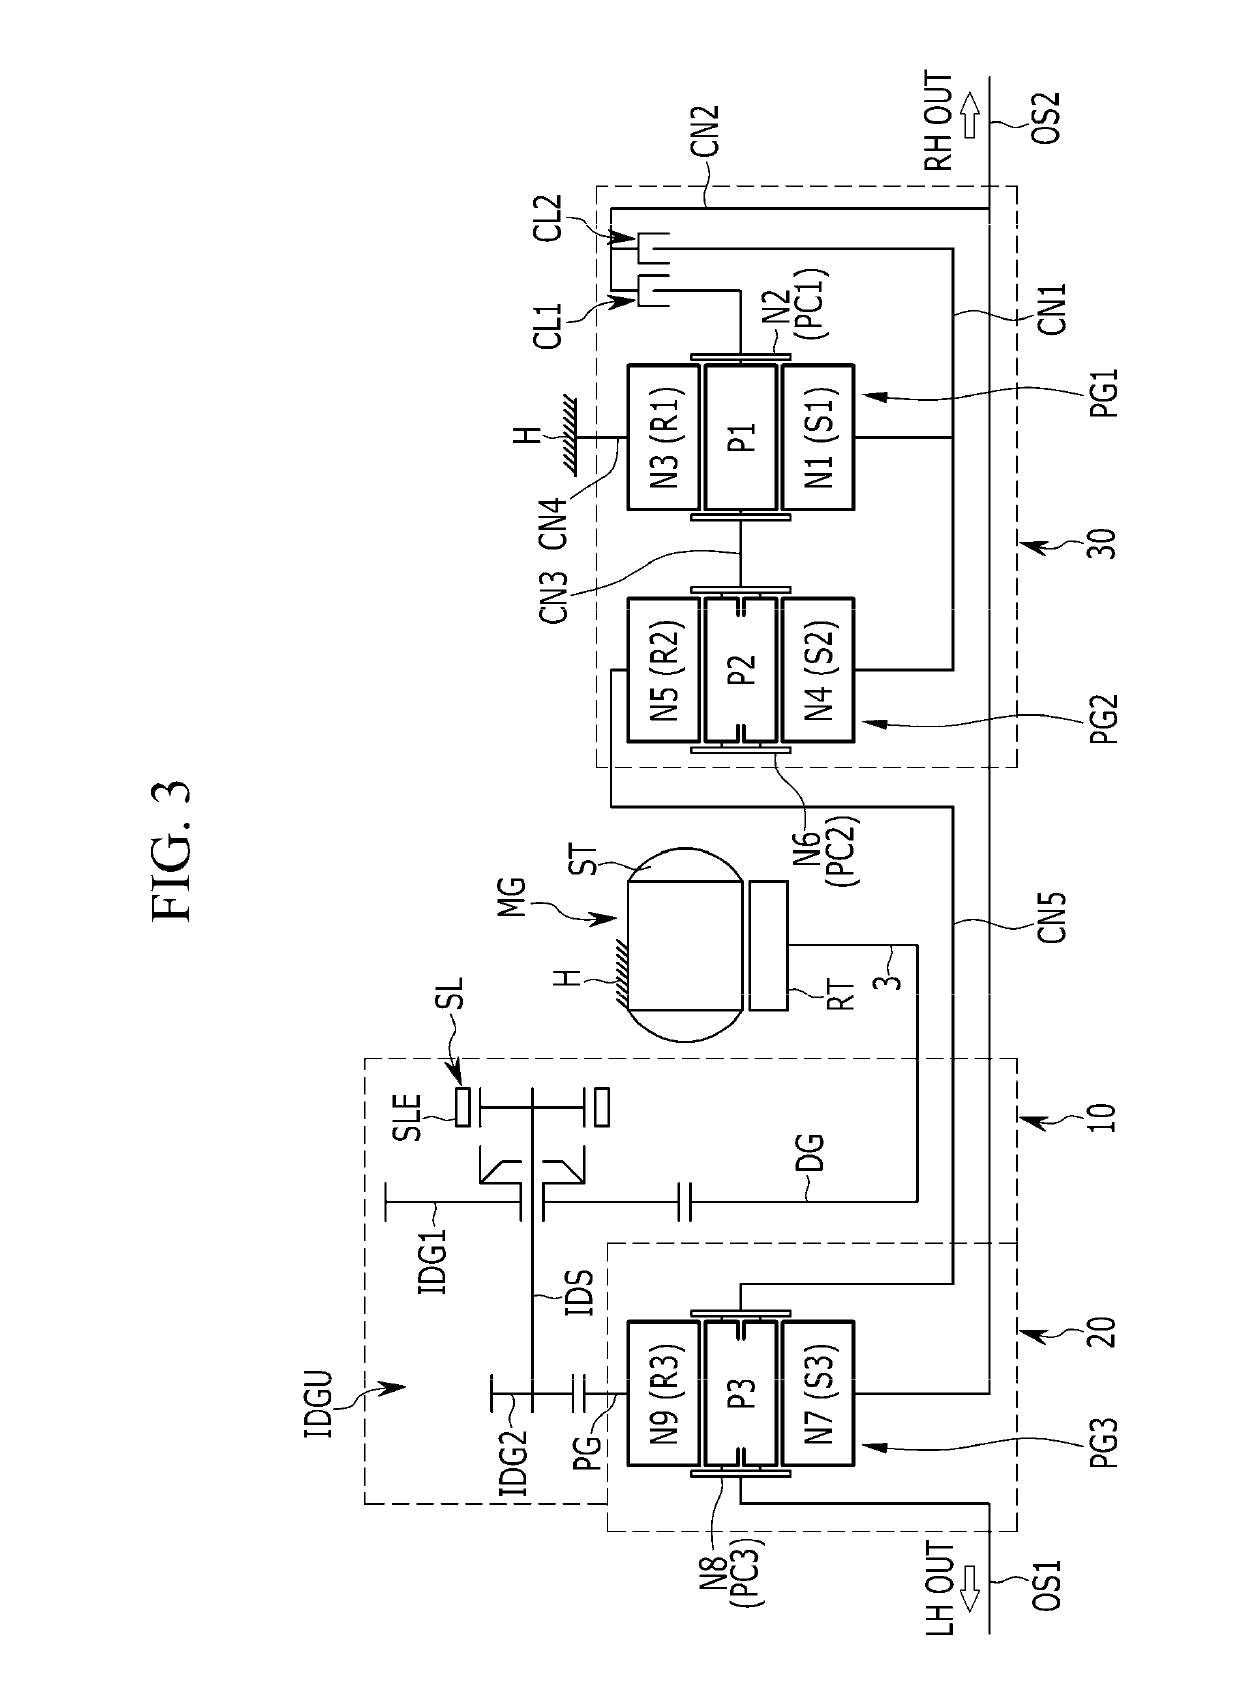 System for torque vectoring